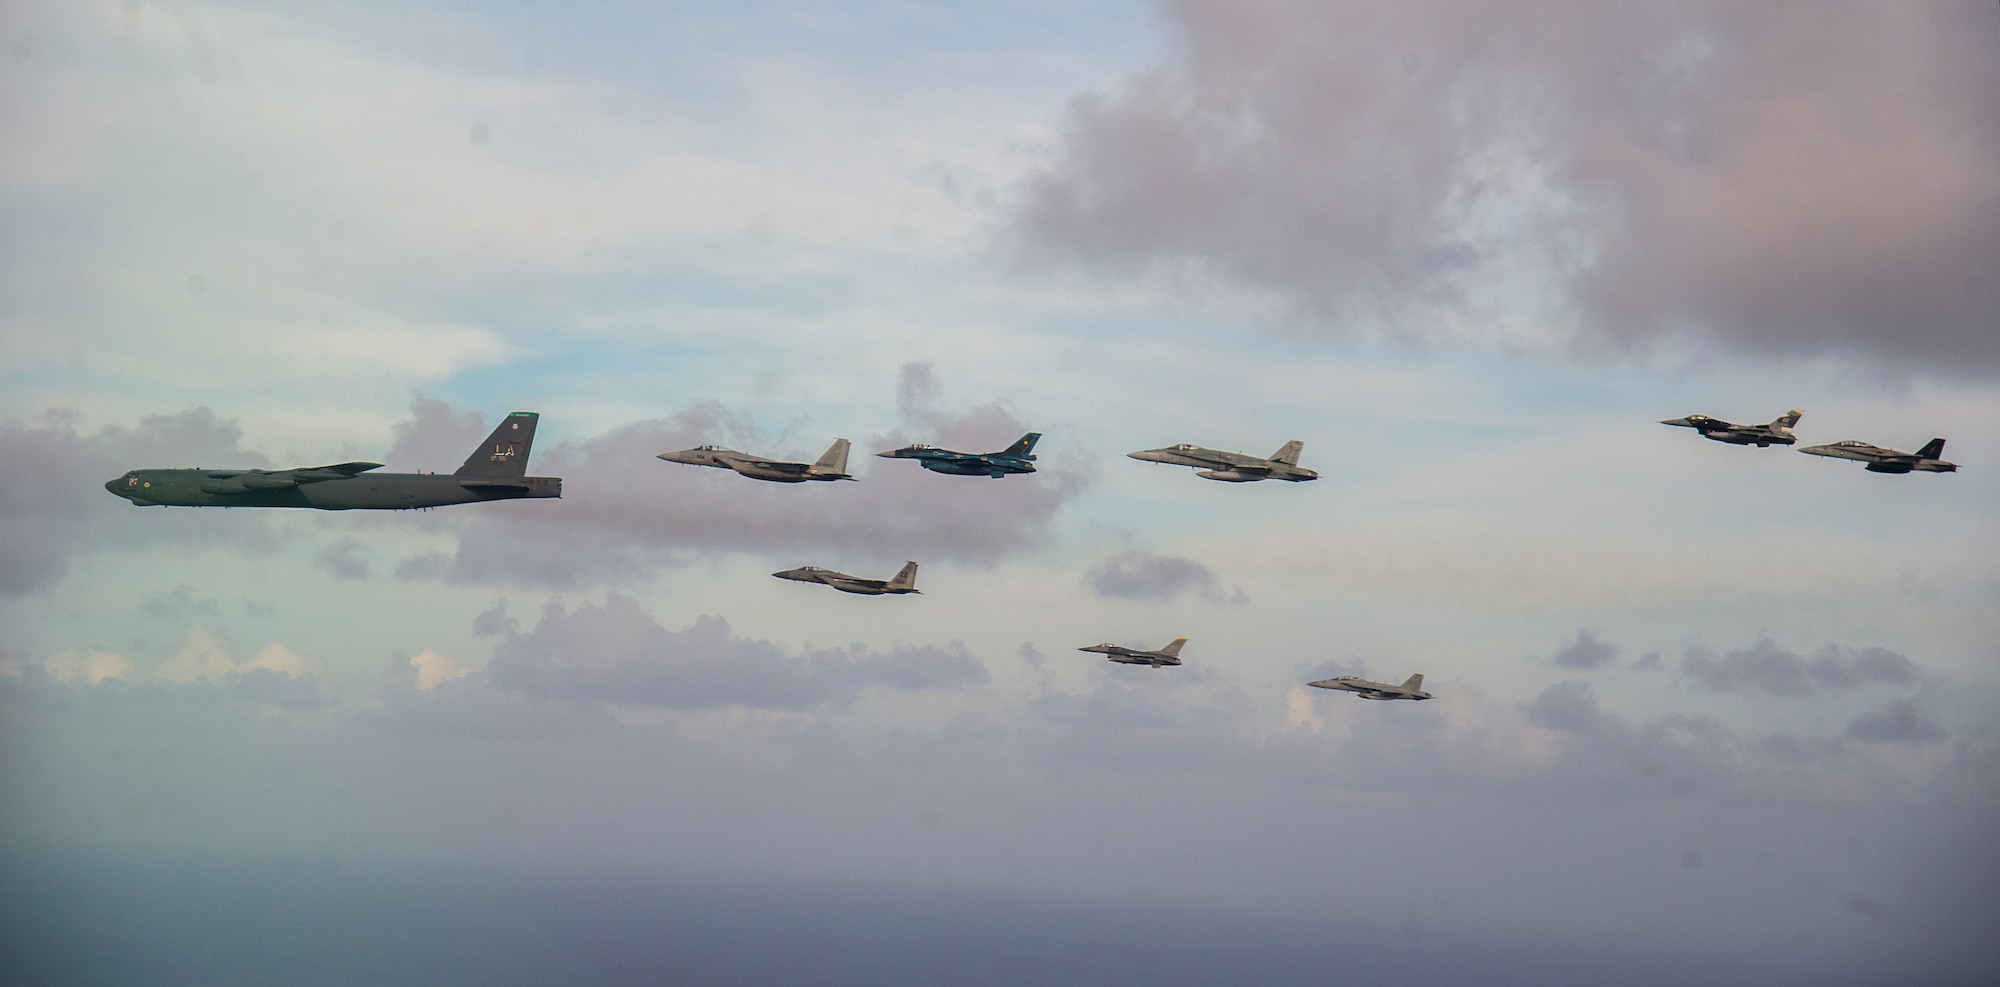 U.S. Air Force, Marine Corps and Navy aircraft fly in formation alongside Japan Air Self-Defense Force and Royal Australian Air Force aircraft during exercise Cope North 18 in the vicinity of Guam, Feb. 21, 2018. Cope North is a long-standing exercise designed to strengthen relationships in the Indo-Pacific region through air operations, humanitarian assistance/disaster relief training.